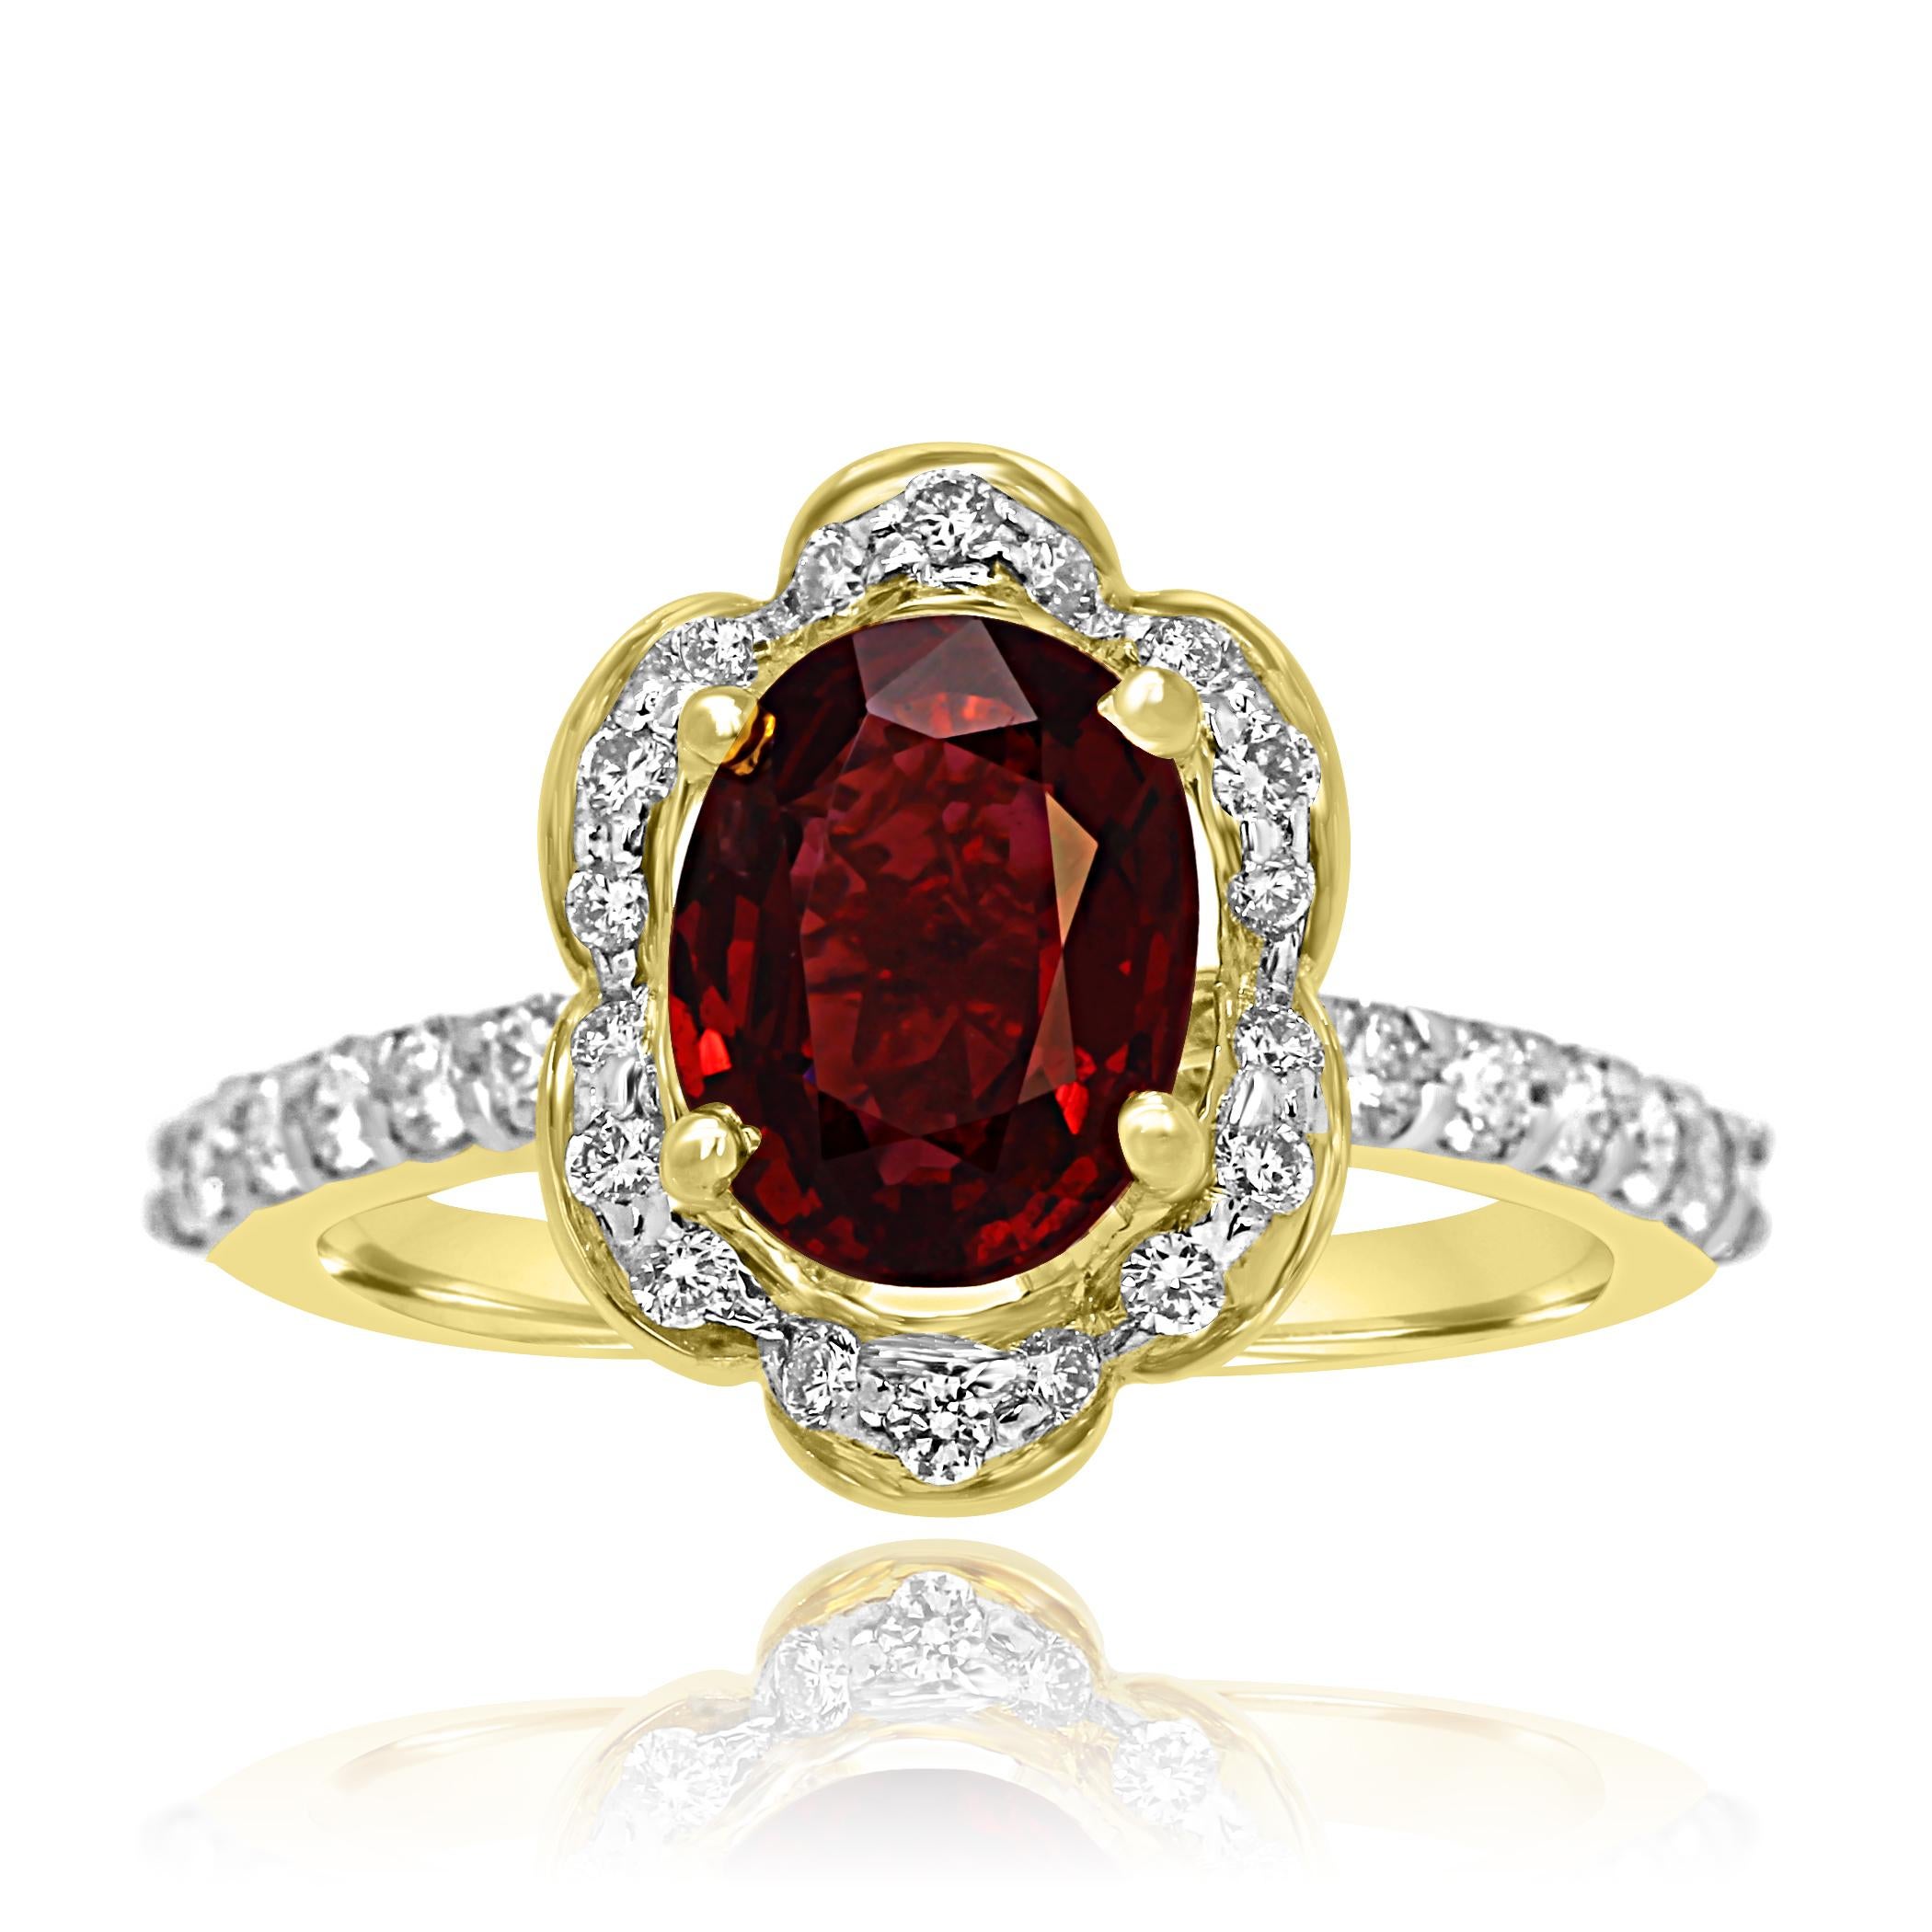 Gorgeous GIA Certified No Heat Burma Spinel Oval 1.77 Carat encircled in a single Halo of White Round Diamonds 0.49 Carat Flanked with diamond on the shank in 14K Yellow Gold Bridal Fashion Ring.

Style available in different price ranges. Prices